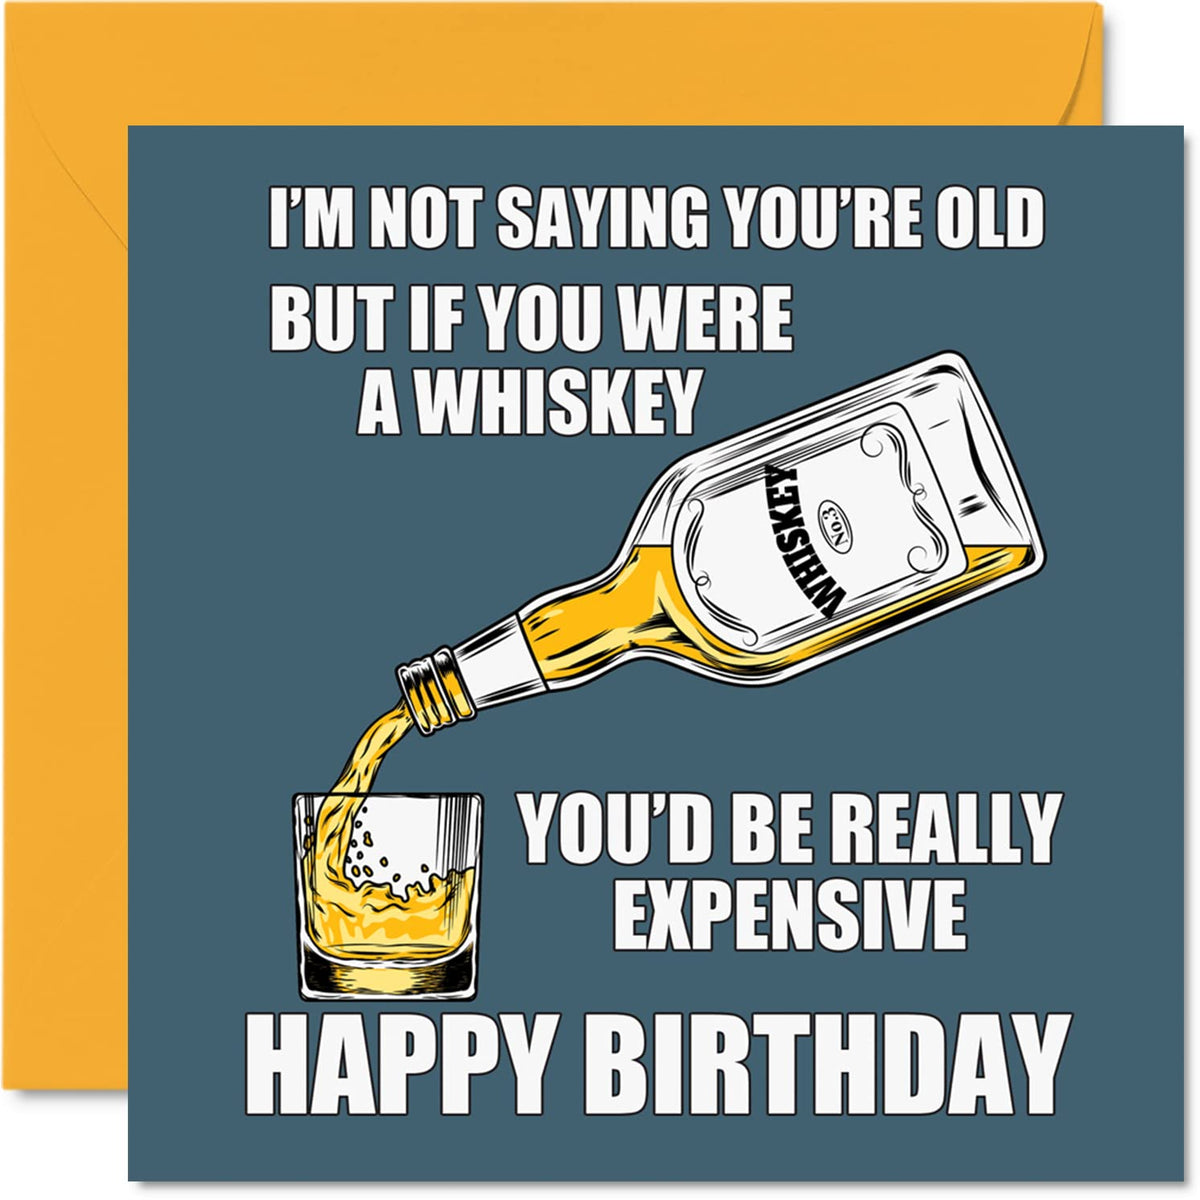 Funny Birthday Cards for Men Women - Aged Whiskey Whisky - Rude Birthday Card for Mum Dad Brother Sister Son Daughter Nan Grandad, 145mm x 145mm Humour 30th 40th 50th 60th 70th Bday Greeting Cards